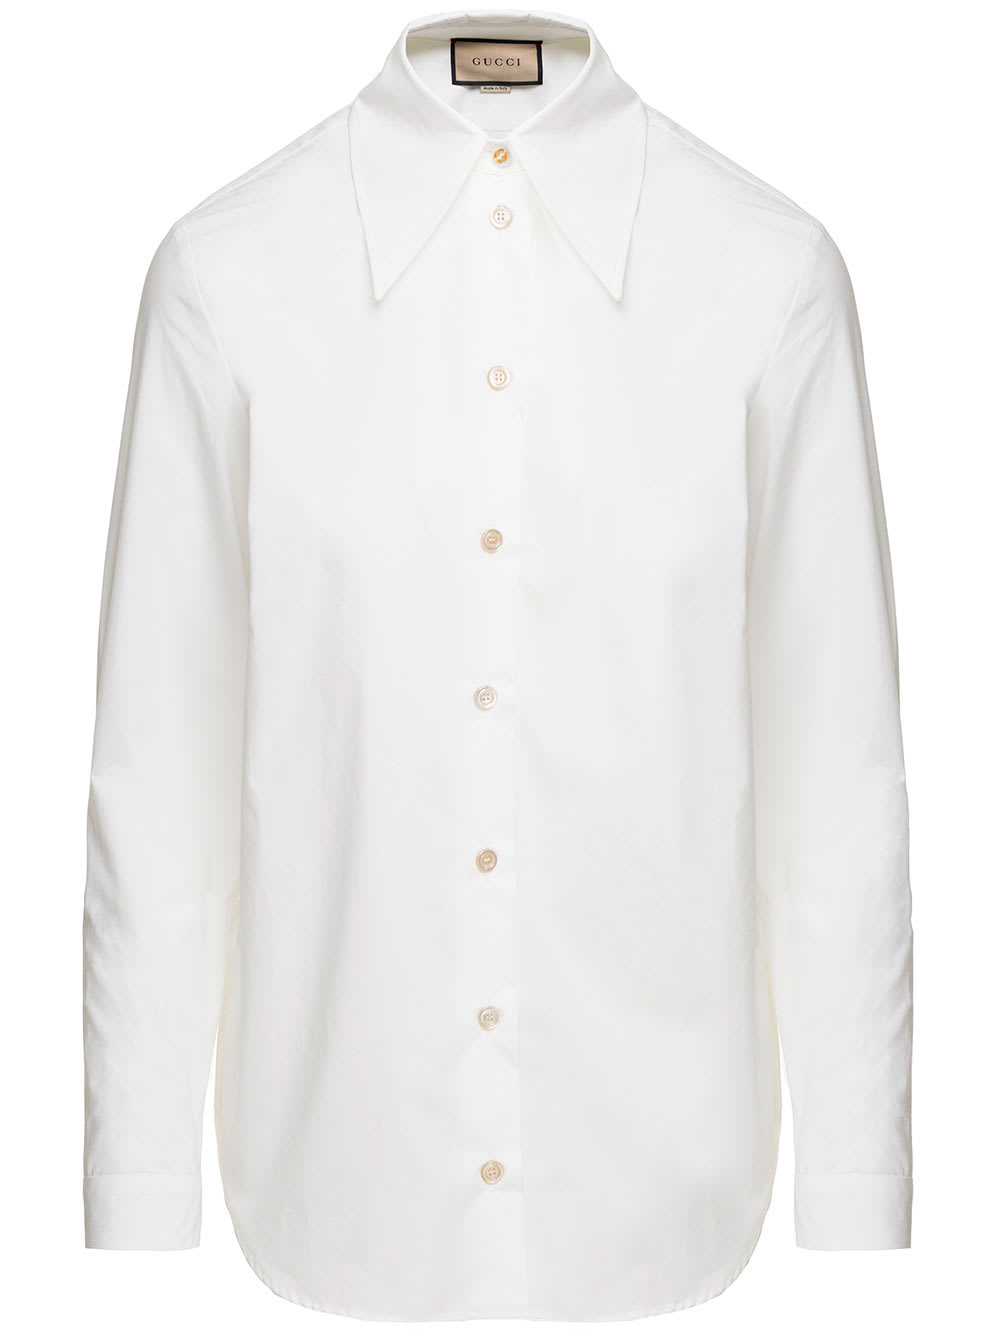 GUCCI WHITE SHIRT WITH OVERSIZED POINTED COLLAR AND LOGO DETAIL IN COTTON WOMAN